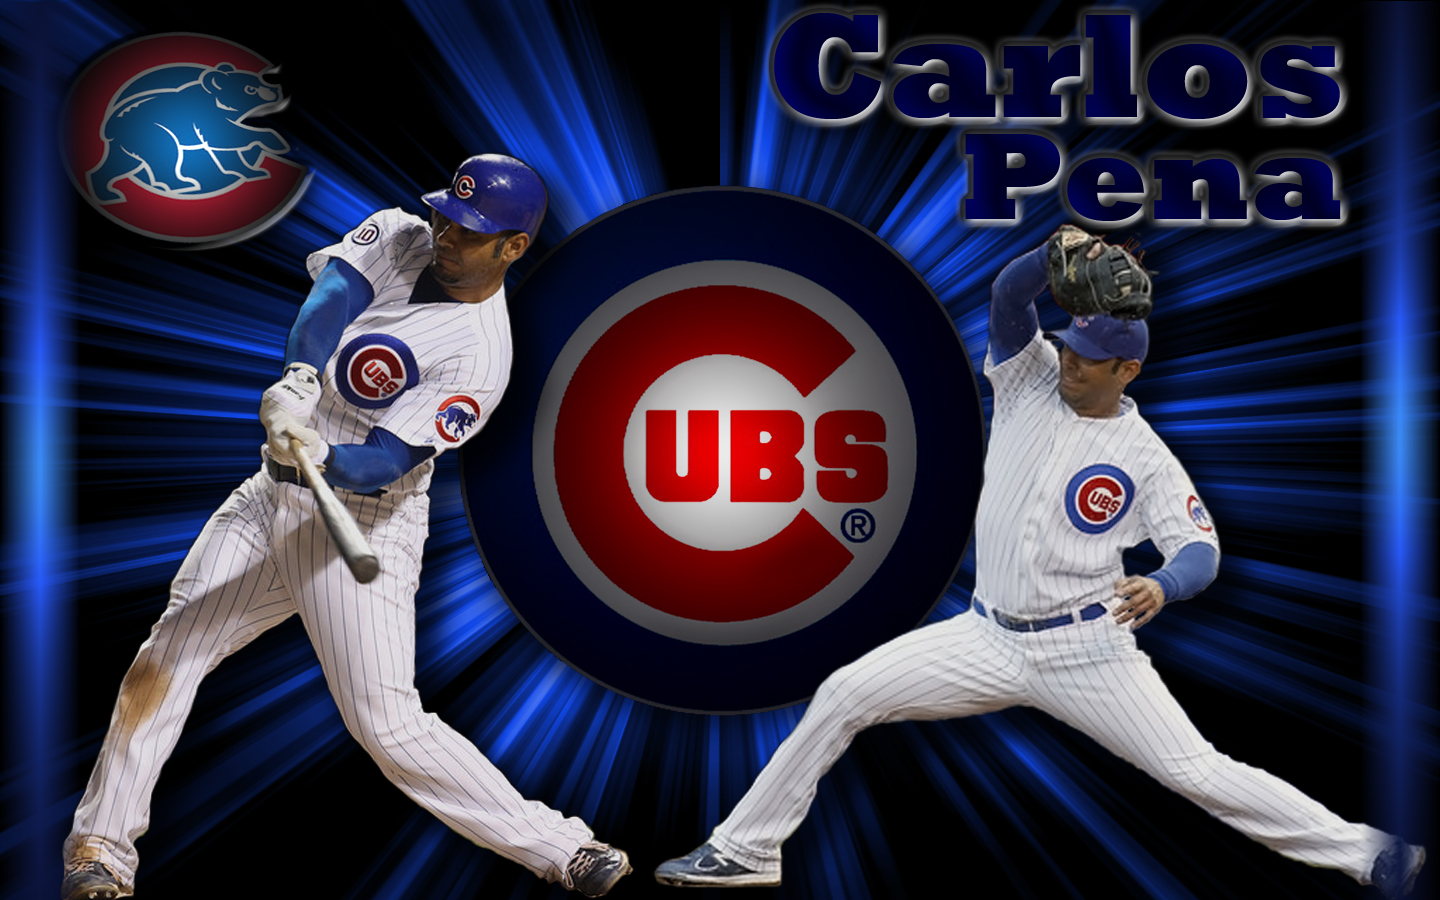 Chicago Cubs wallpapers Chicago Cubs background